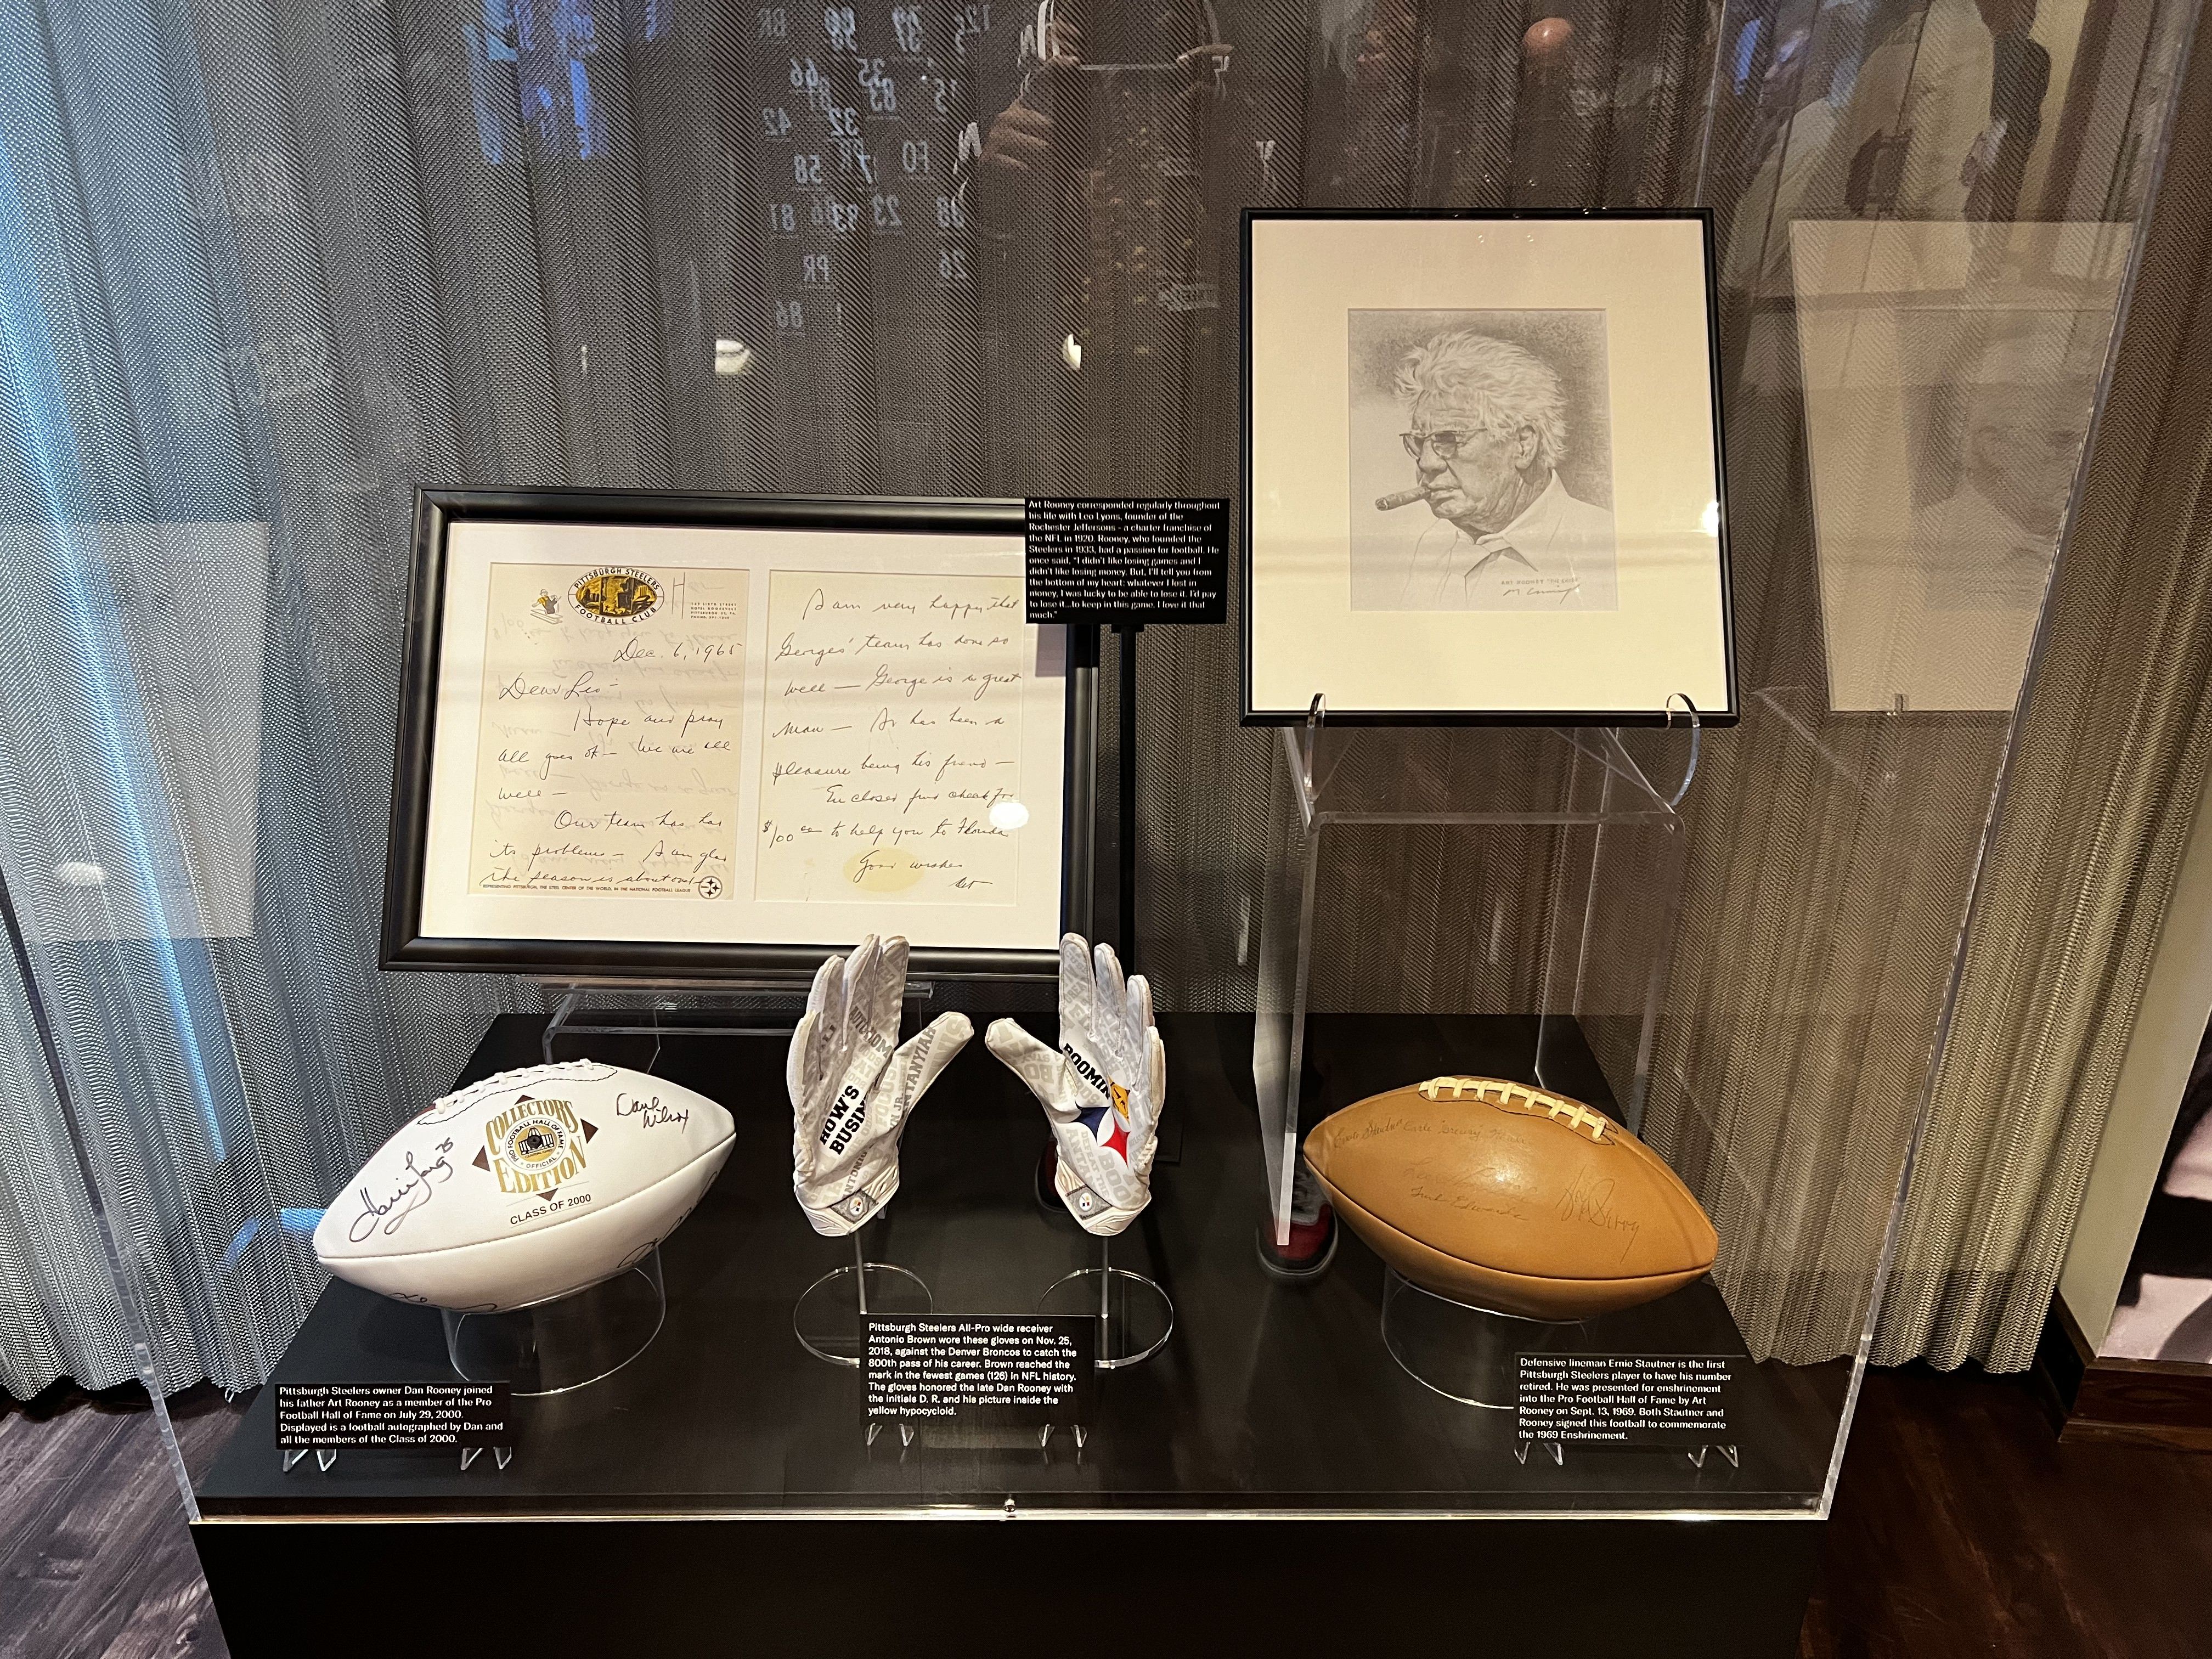 Artifacts at the Steelers exhibit in Canton. 